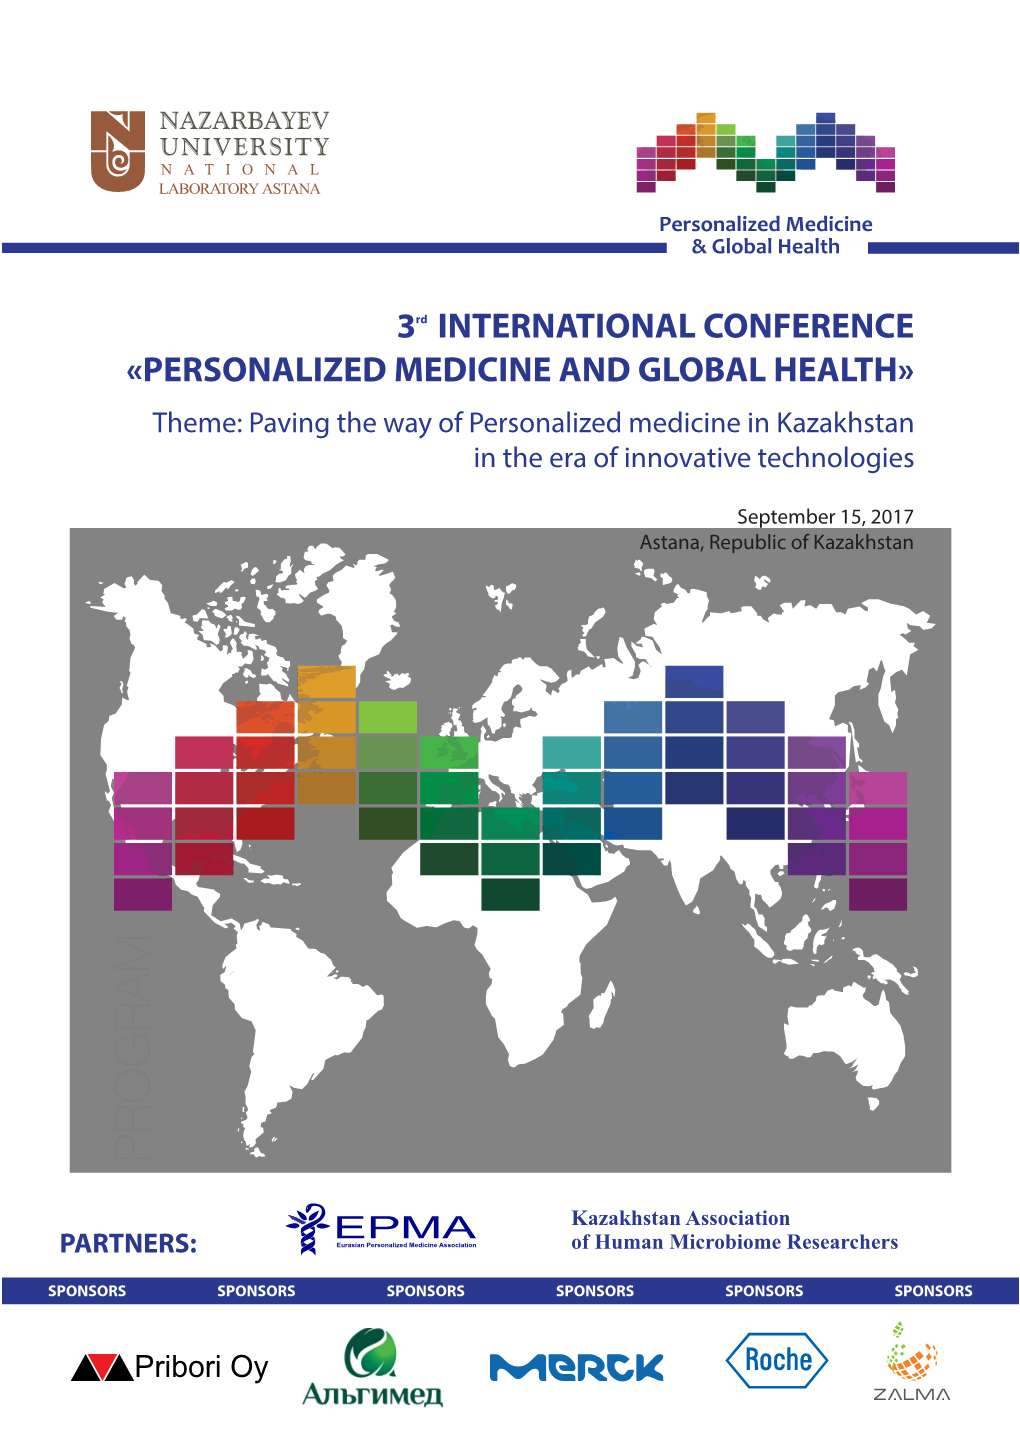 PERSONALIZED MEDICINE and GLOBAL HEALTH» Theme: Paving the Way of Personalized Medicine in Kazakhstan in the Era of Innovative Technologies